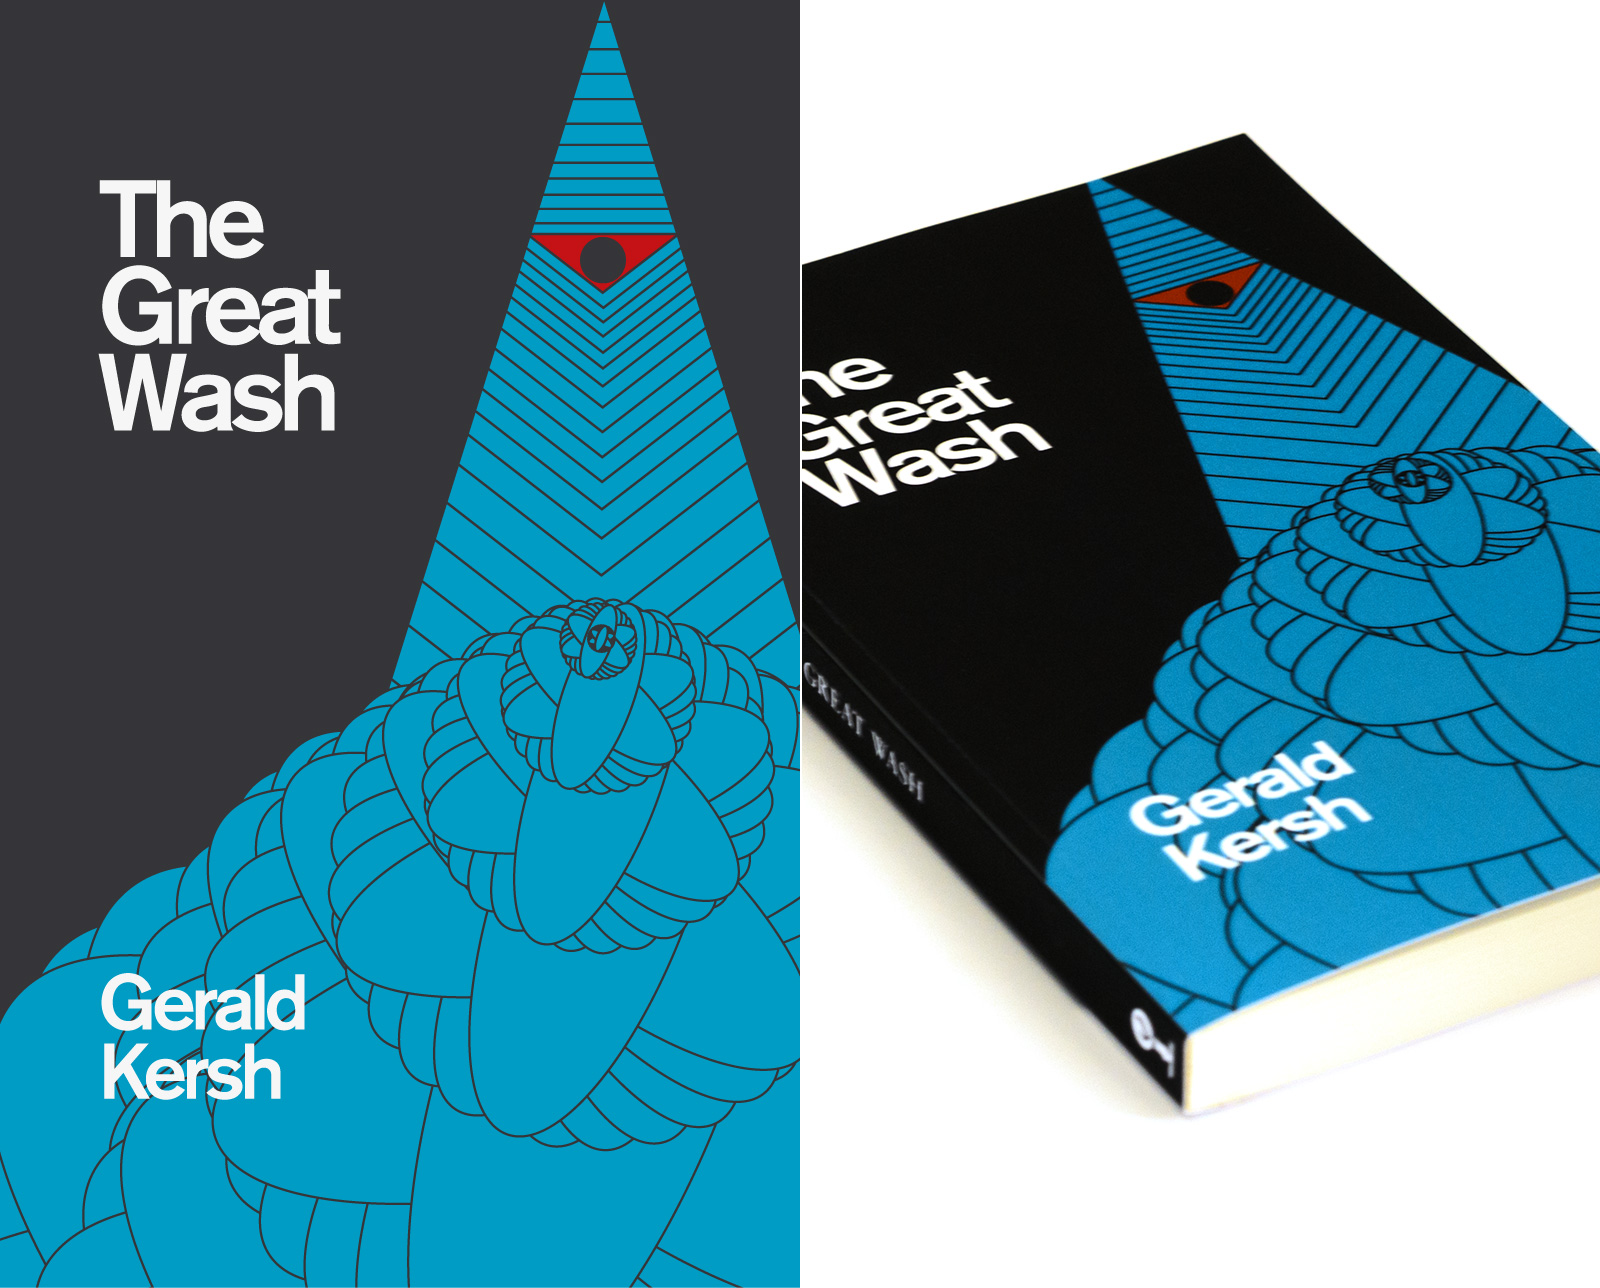 The Great Wash by Gerald Kersh